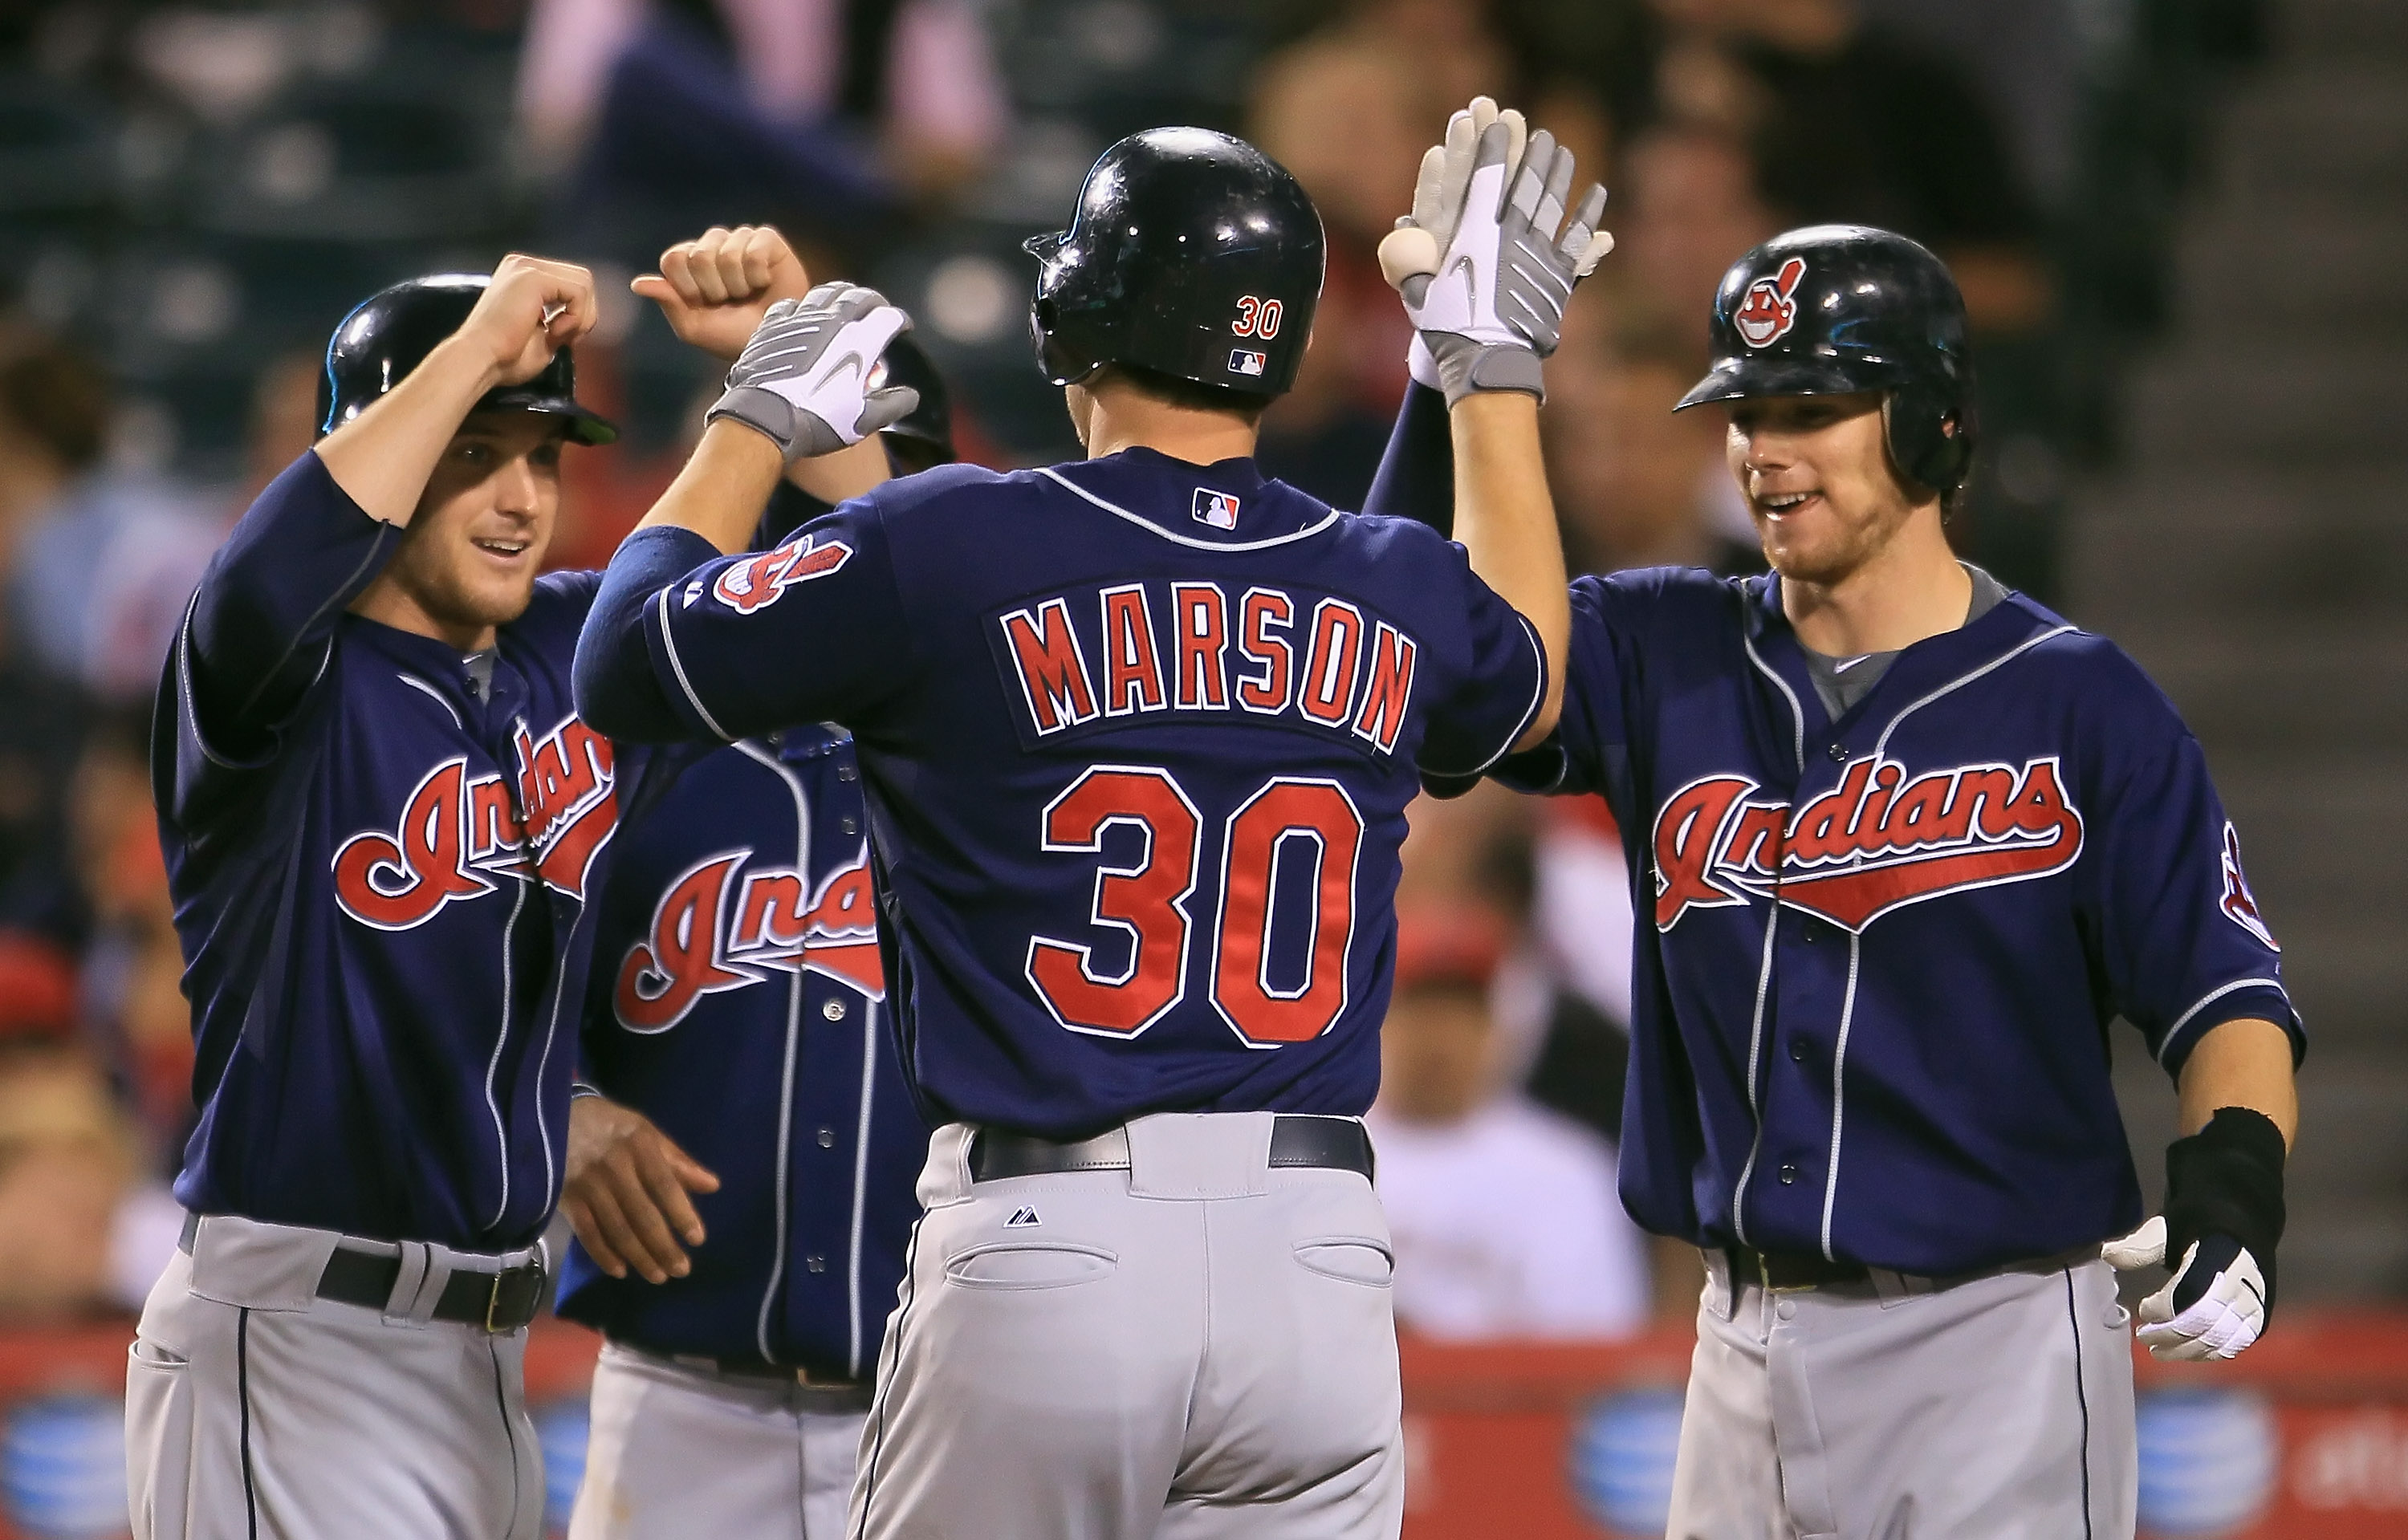 ANAHEIM, CA - SEPTEMBER 07:  (L-R) Trevor Crowe #4, Lou Marson #30 and Jason Donald #16 of the Cleveland Indians celebrate Marson's grand slam home run in the sixth inning against the Los Angeles Angels of Anaheim at Angel Stadium on September 7, 2010 in